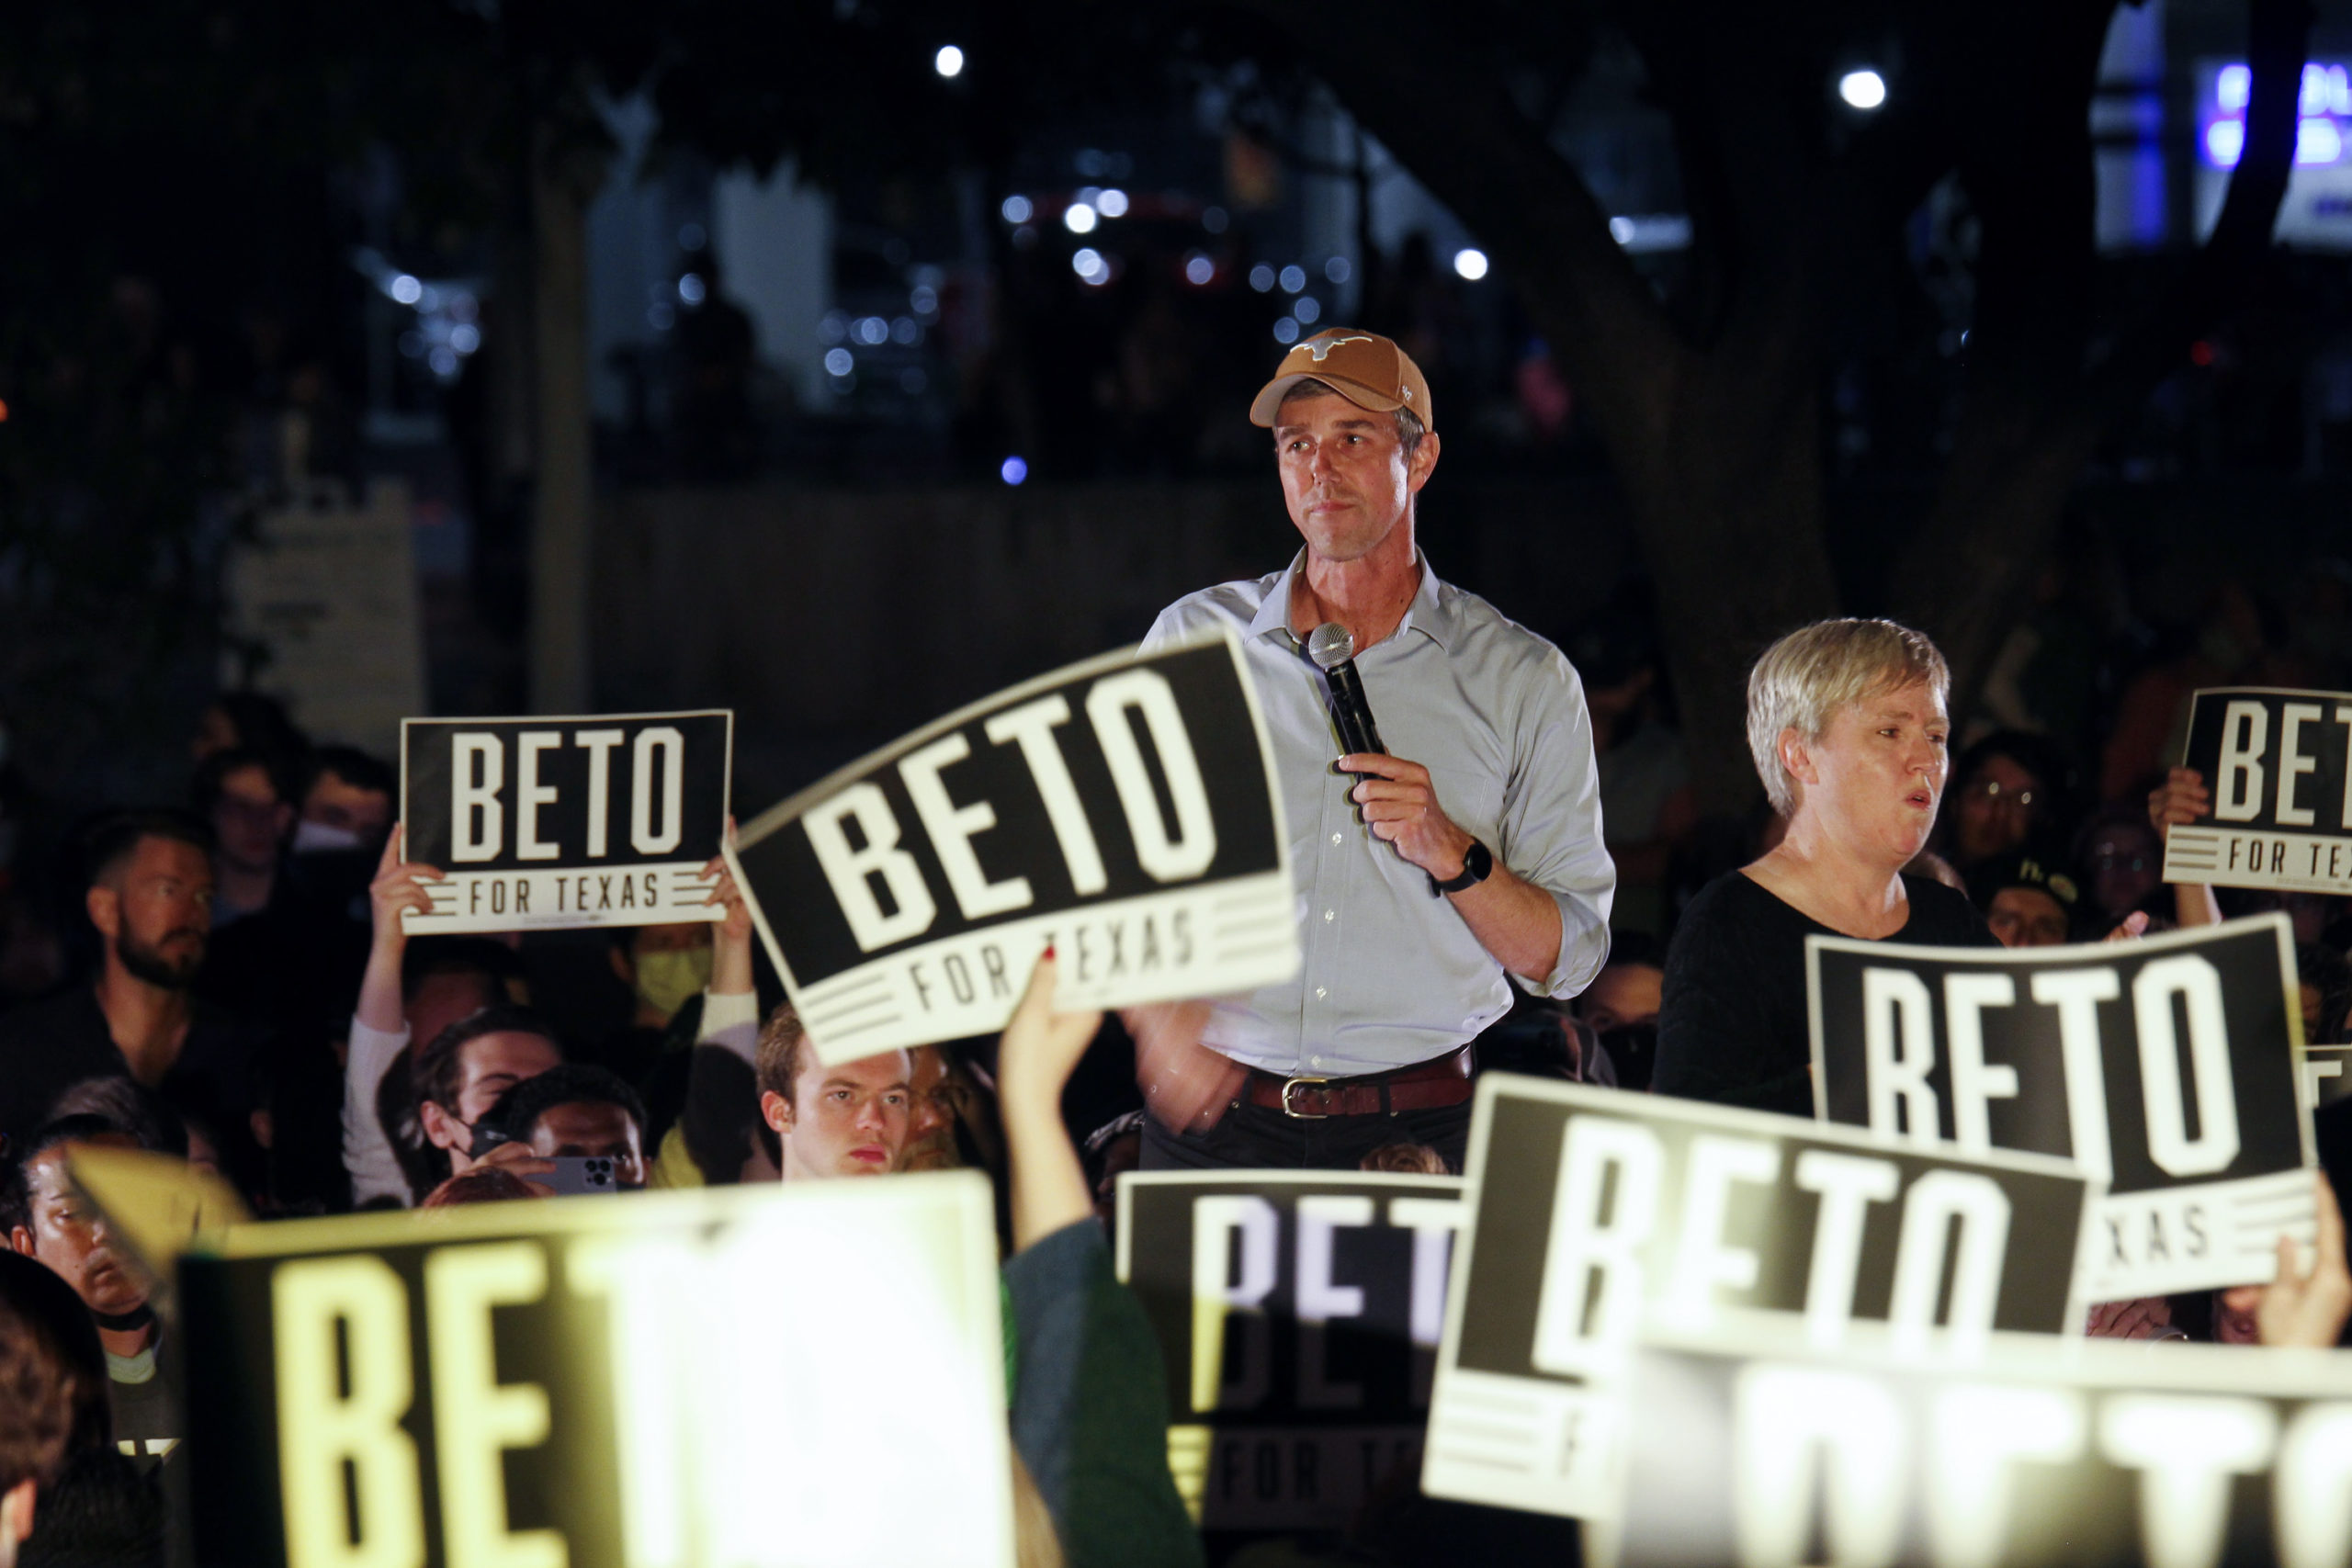 Beto O'Rourke stands at a rally, holding a microphone, with a distant expression. Around him, supporters hold BETO signs aloft. O'Rourke met defeat in the 2022 election despite spending 10s of millions.